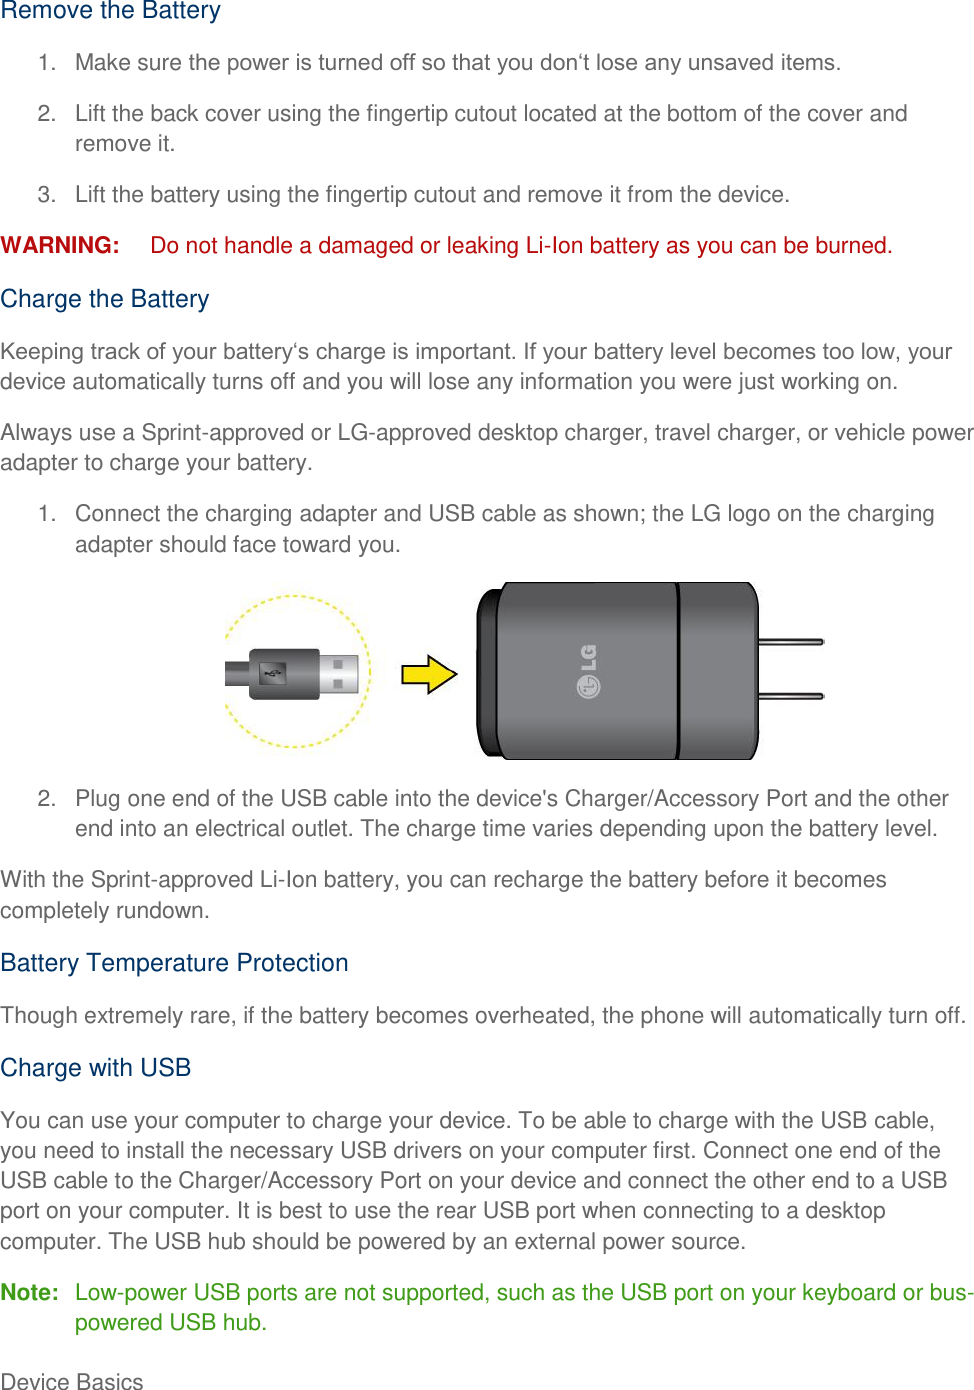 Device Basics     Remove the Battery 1.  Make sure  2.  Lift the back cover using the fingertip cutout located at the bottom of the cover and remove it. 3.  Lift the battery using the fingertip cutout and remove it from the device. WARNING:  Do not handle a damaged or leaking Li-Ion battery as you can be burned. Charge the Battery  device automatically turns off and you will lose any information you were just working on. Always use a Sprint-approved or LG-approved desktop charger, travel charger, or vehicle power adapter to charge your battery. 1.  Connect the charging adapter and USB cable as shown; the LG logo on the charging adapter should face toward you.  2.  Plug one end of the USB cable into the device&apos;s Charger/Accessory Port and the other end into an electrical outlet. The charge time varies depending upon the battery level. With the Sprint-approved Li-Ion battery, you can recharge the battery before it becomes completely rundown. Battery Temperature Protection Though extremely rare, if the battery becomes overheated, the phone will automatically turn off. Charge with USB You can use your computer to charge your device. To be able to charge with the USB cable, you need to install the necessary USB drivers on your computer first. Connect one end of the USB cable to the Charger/Accessory Port on your device and connect the other end to a USB port on your computer. It is best to use the rear USB port when connecting to a desktop computer. The USB hub should be powered by an external power source. Note:  Low-power USB ports are not supported, such as the USB port on your keyboard or bus-powered USB hub. 